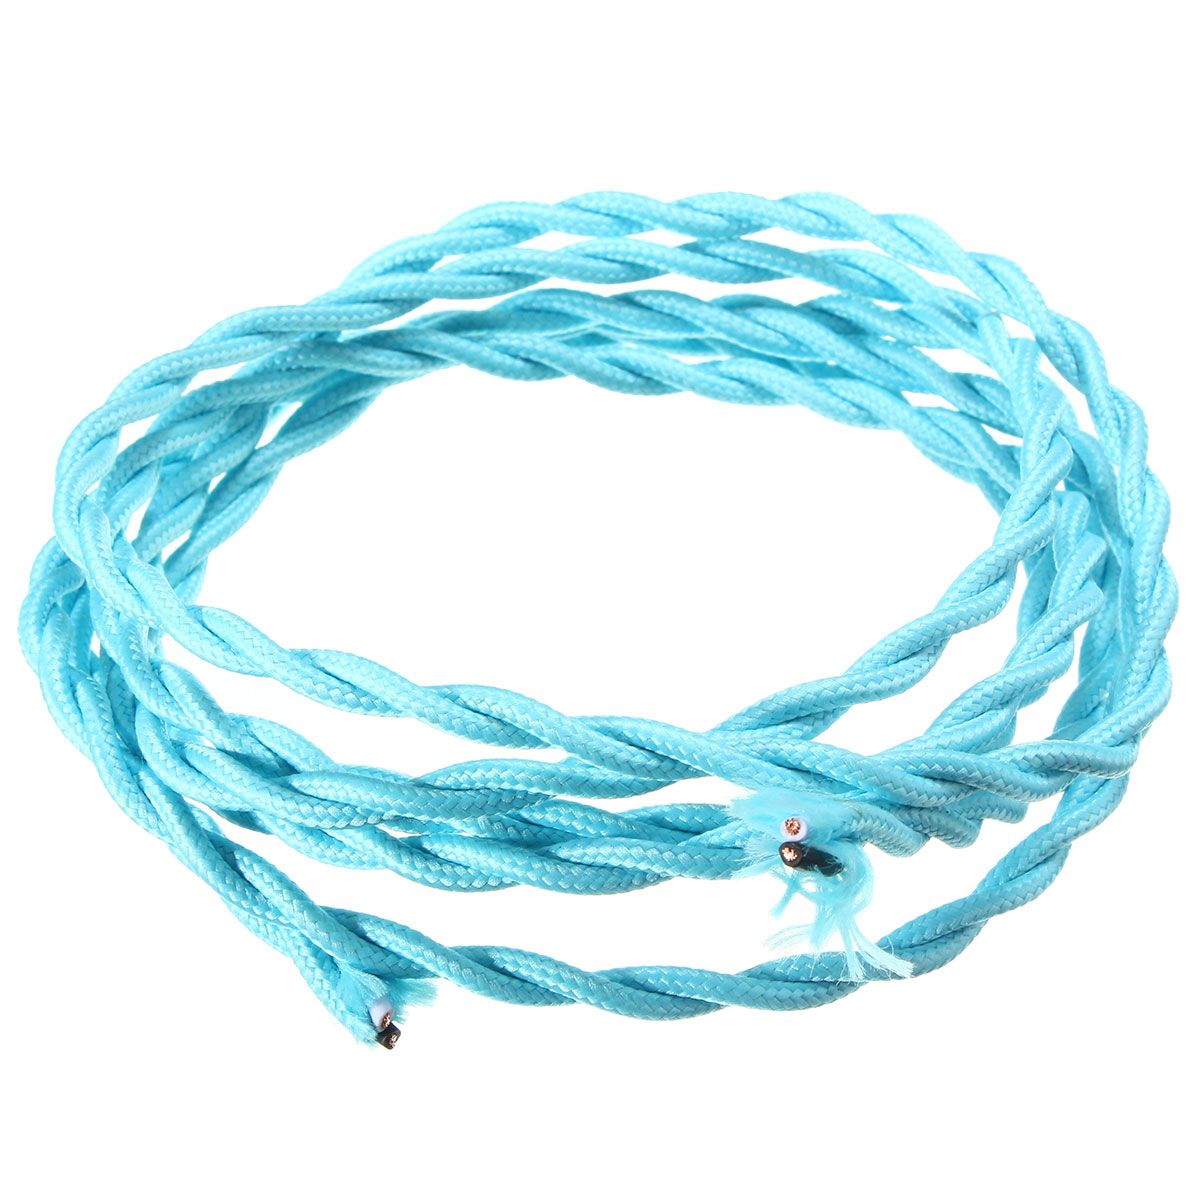 3M-Vintage-075MM-2-Core-Twist-Braided-Fabric-Cable-Wire-Electric-Cord-For-Pendant-Light-1431163